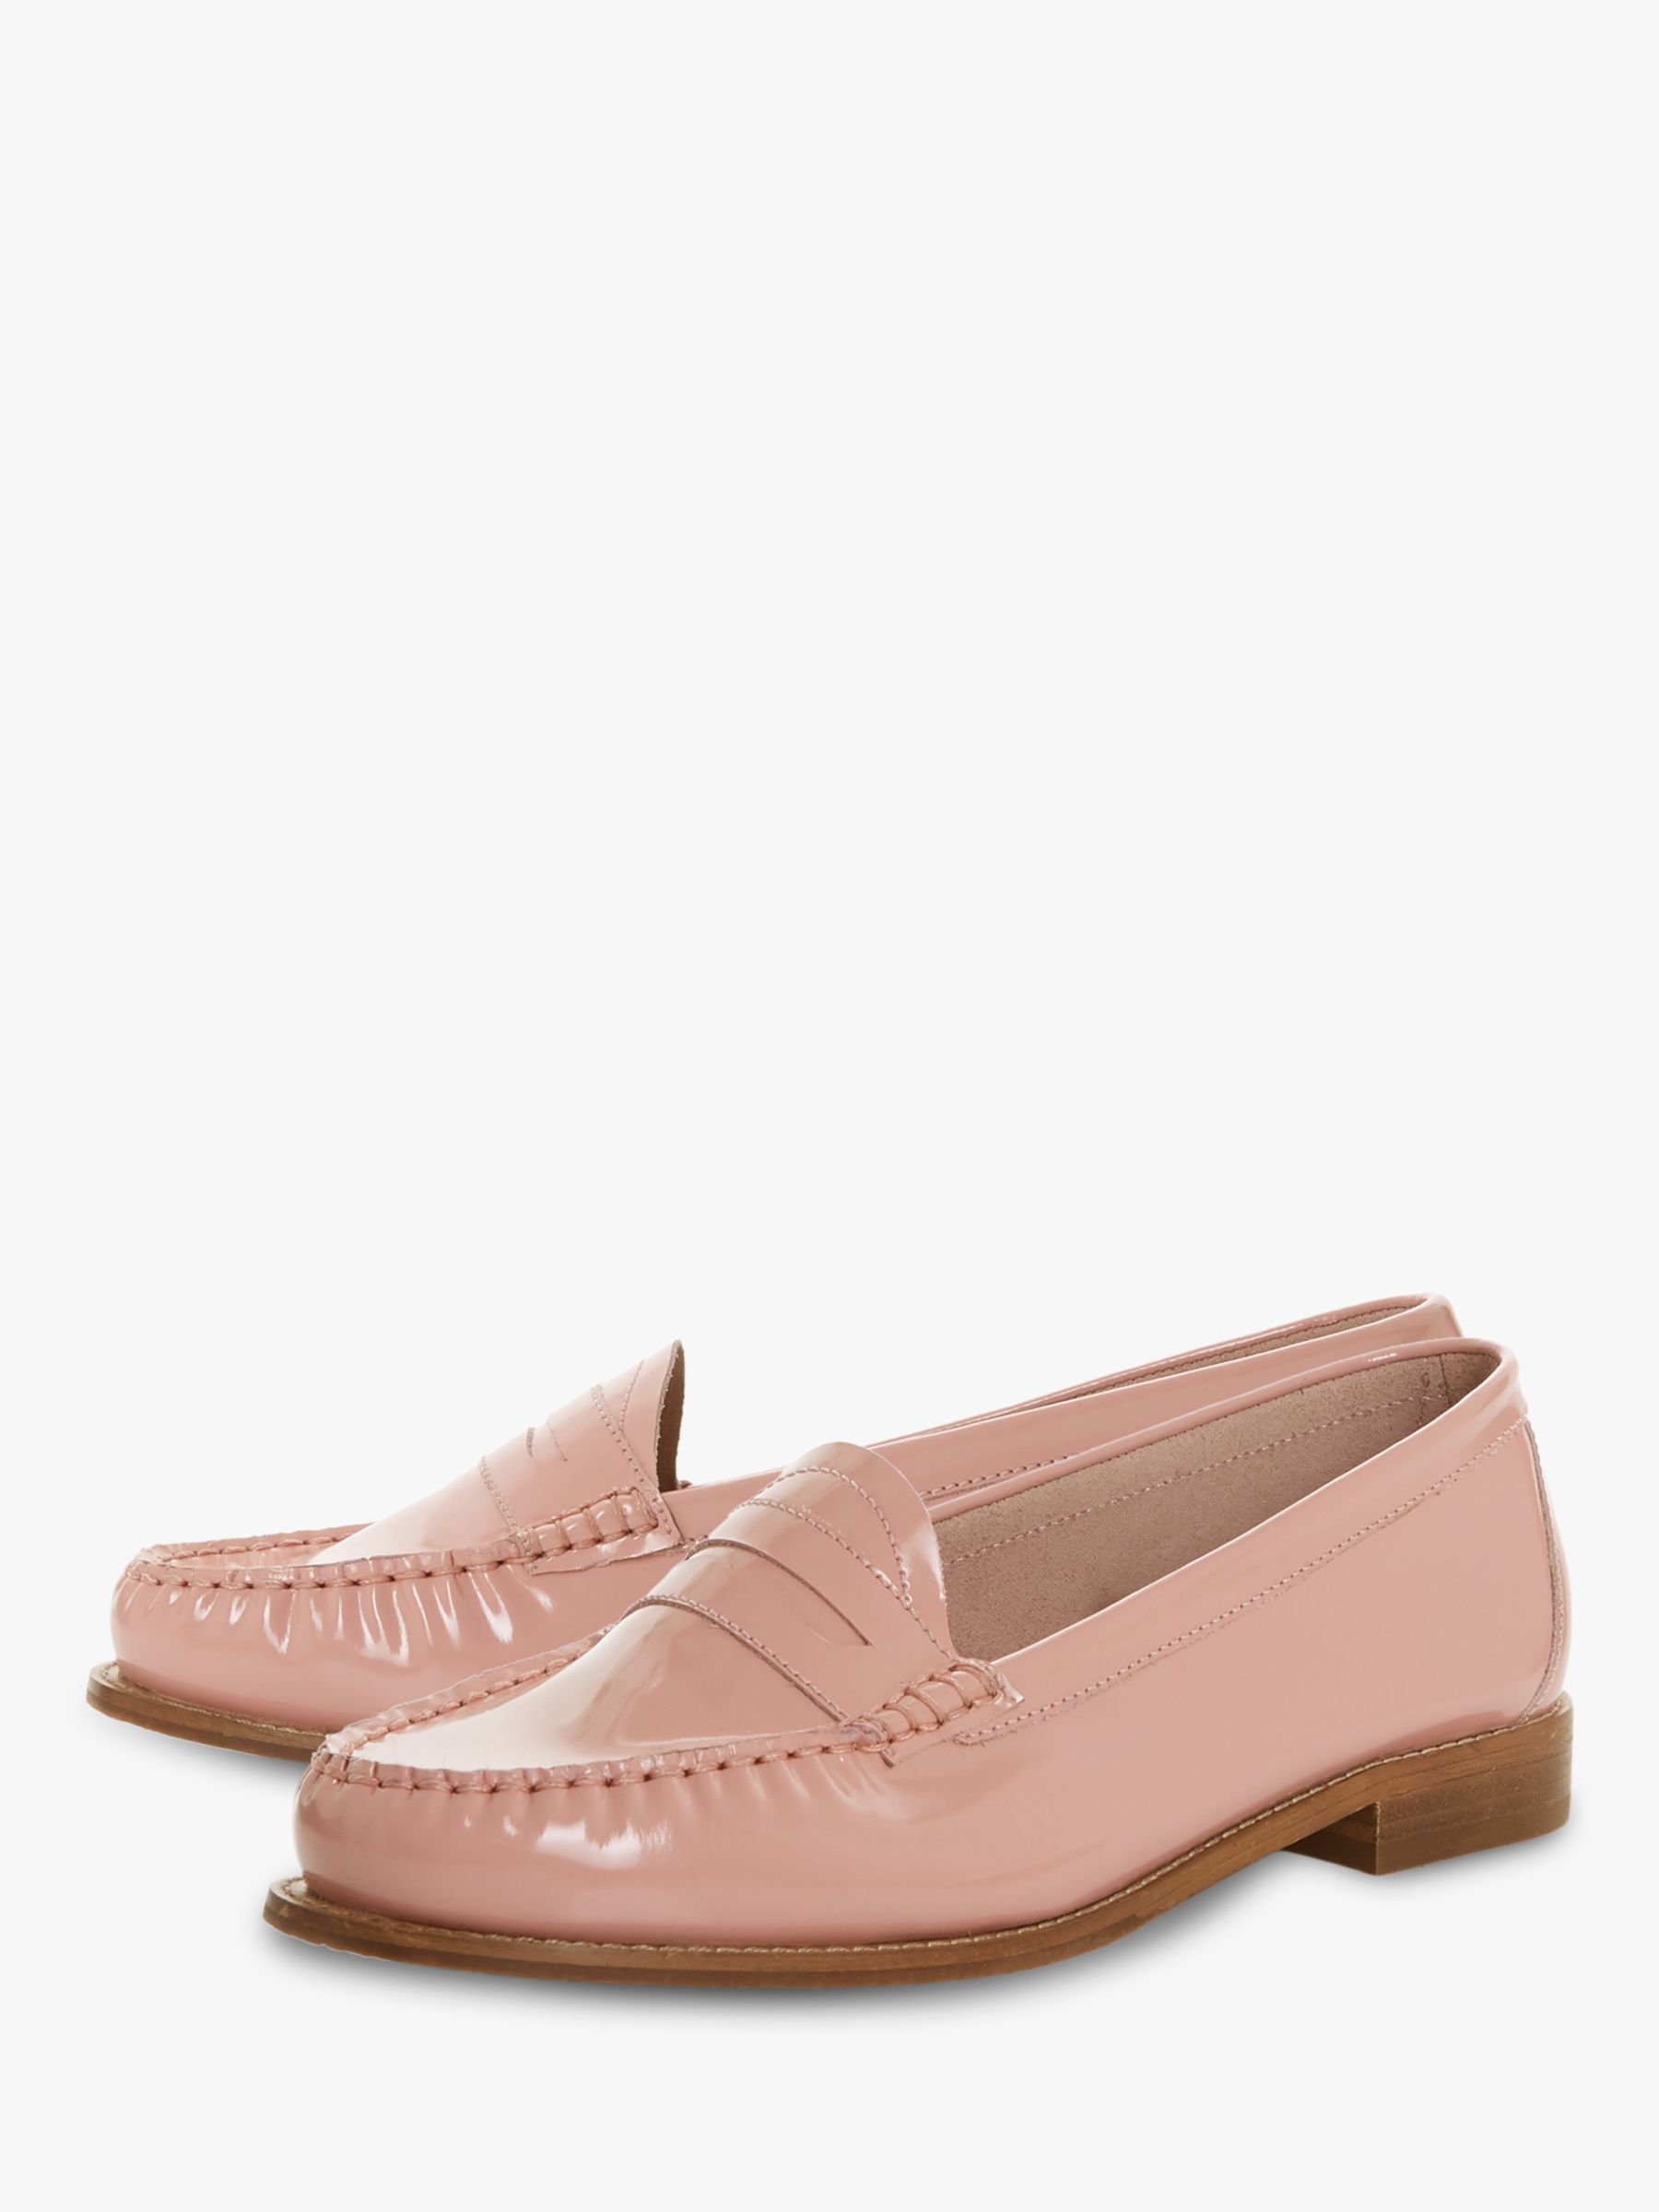 Dune Glossy Loafers | Pink Patent Leather at John Lewis & Partners